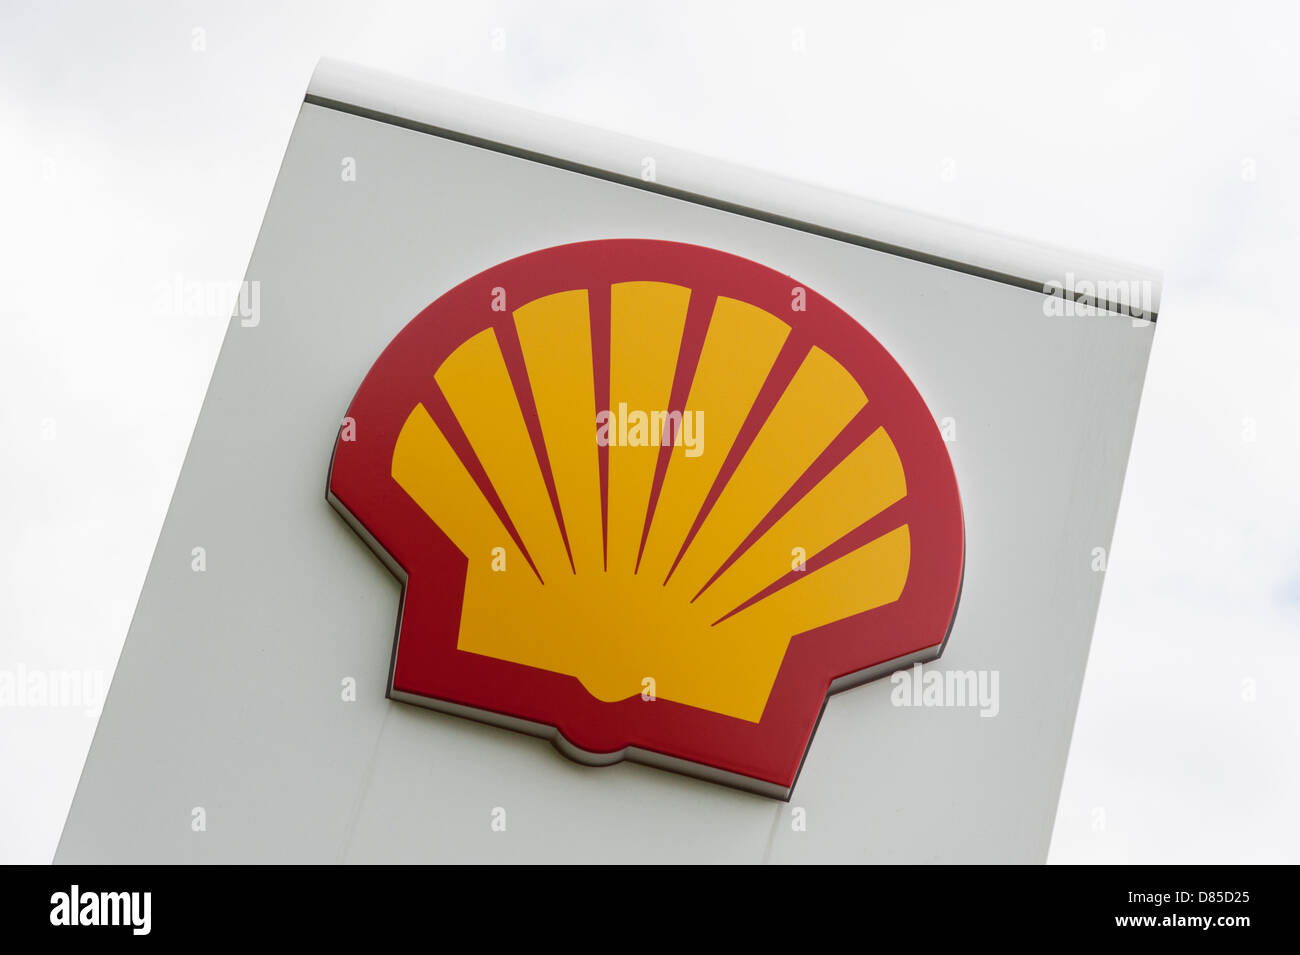 Shell logo on a petrol station sign Stock Photo